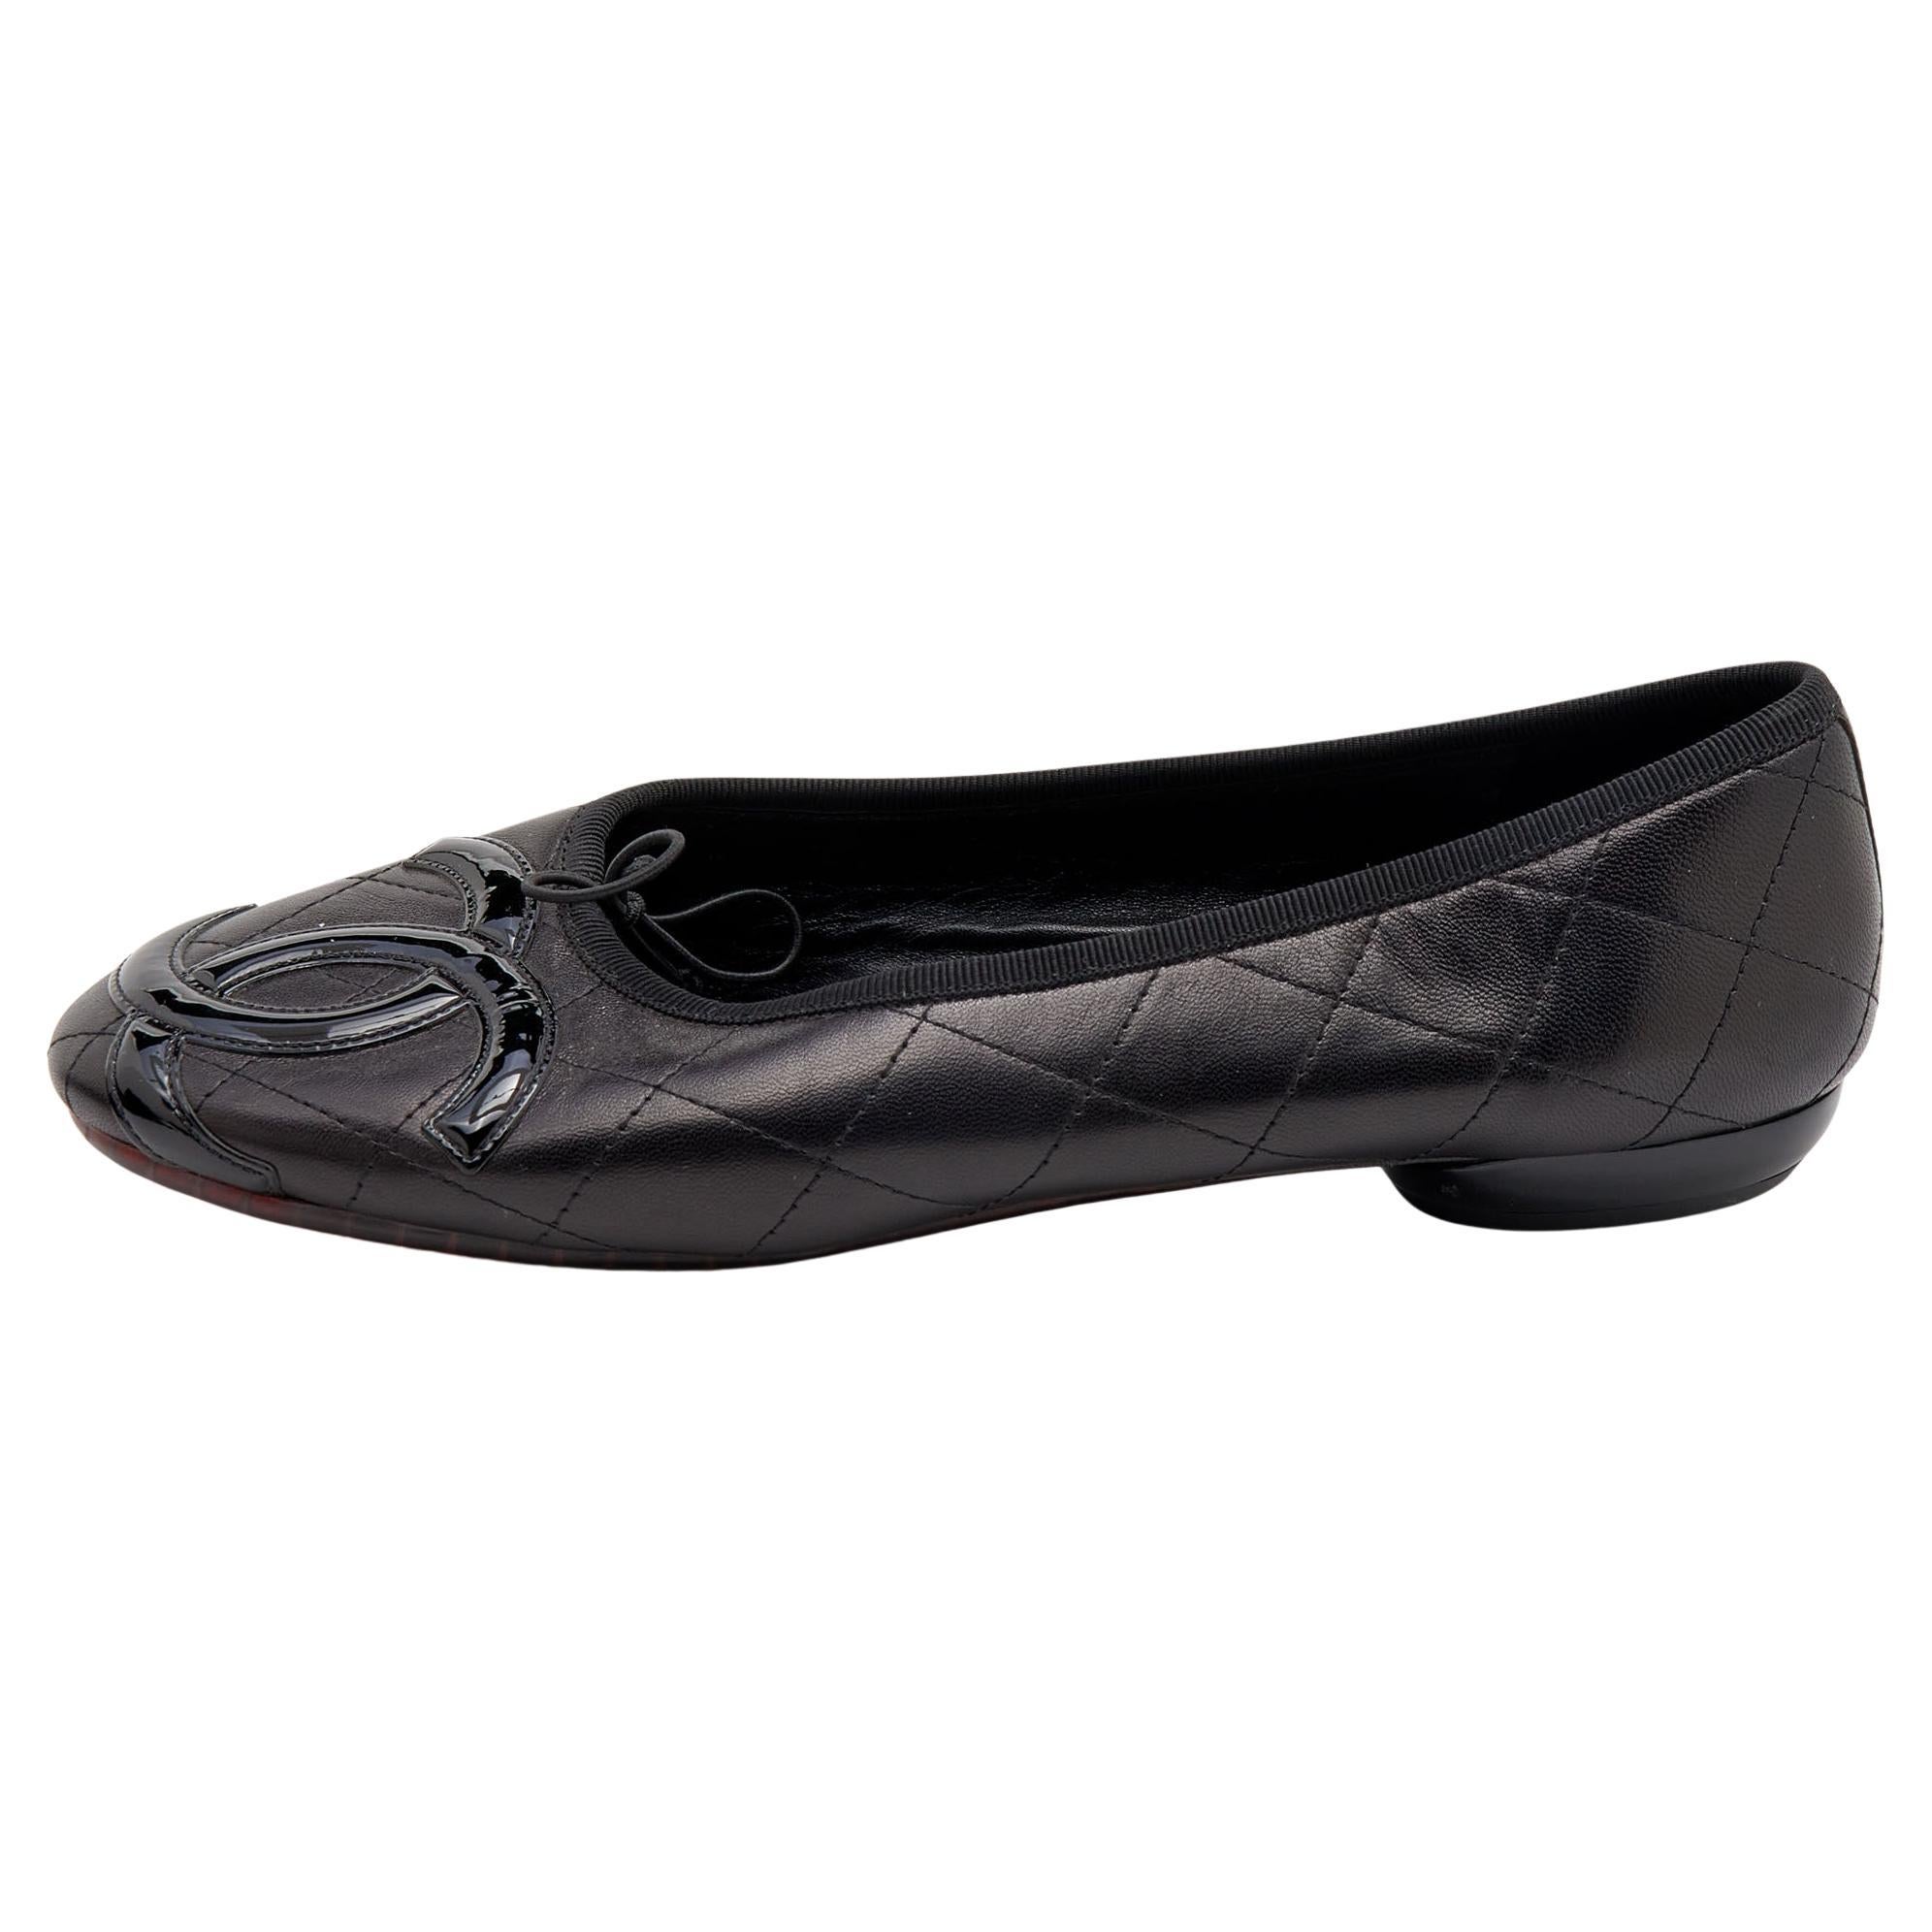 Chanel Black Leather and Patent Leather CC Cambon Ballet Flats Size 39